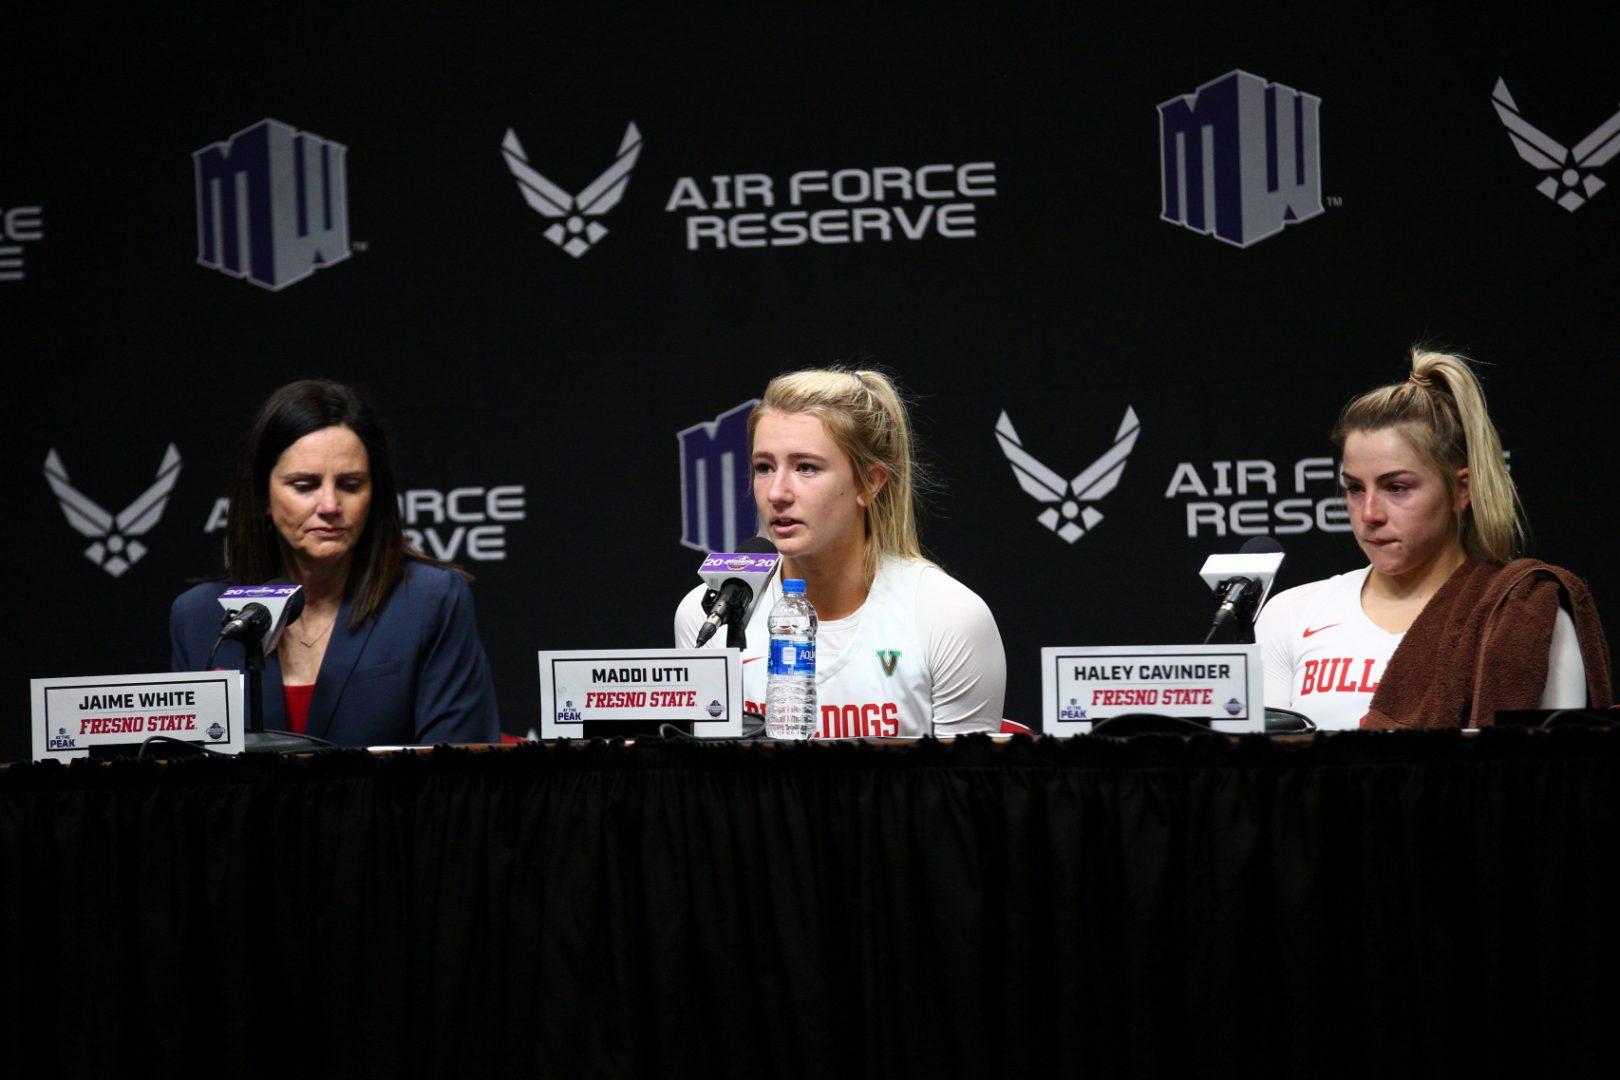 Utti speaks during the post-game press conference after their loss to Boise State at the Thomas & Mack Center in Las Vegas, Nevada on Wednesday, March. 4, 2020. (Armando Carreno/The Collegian)